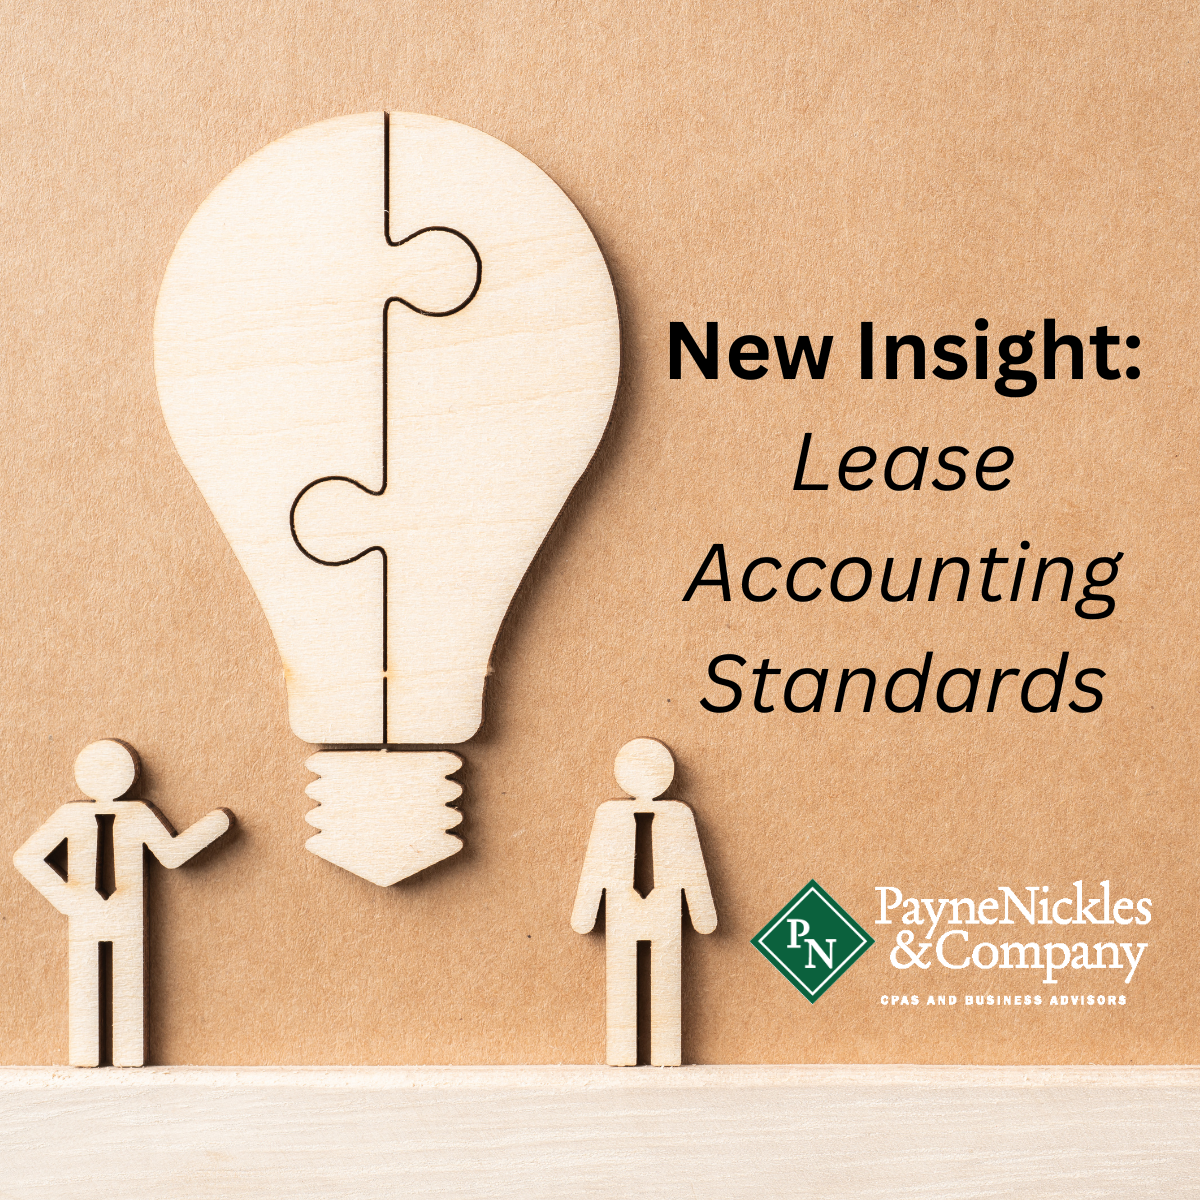 New Lease Accounting